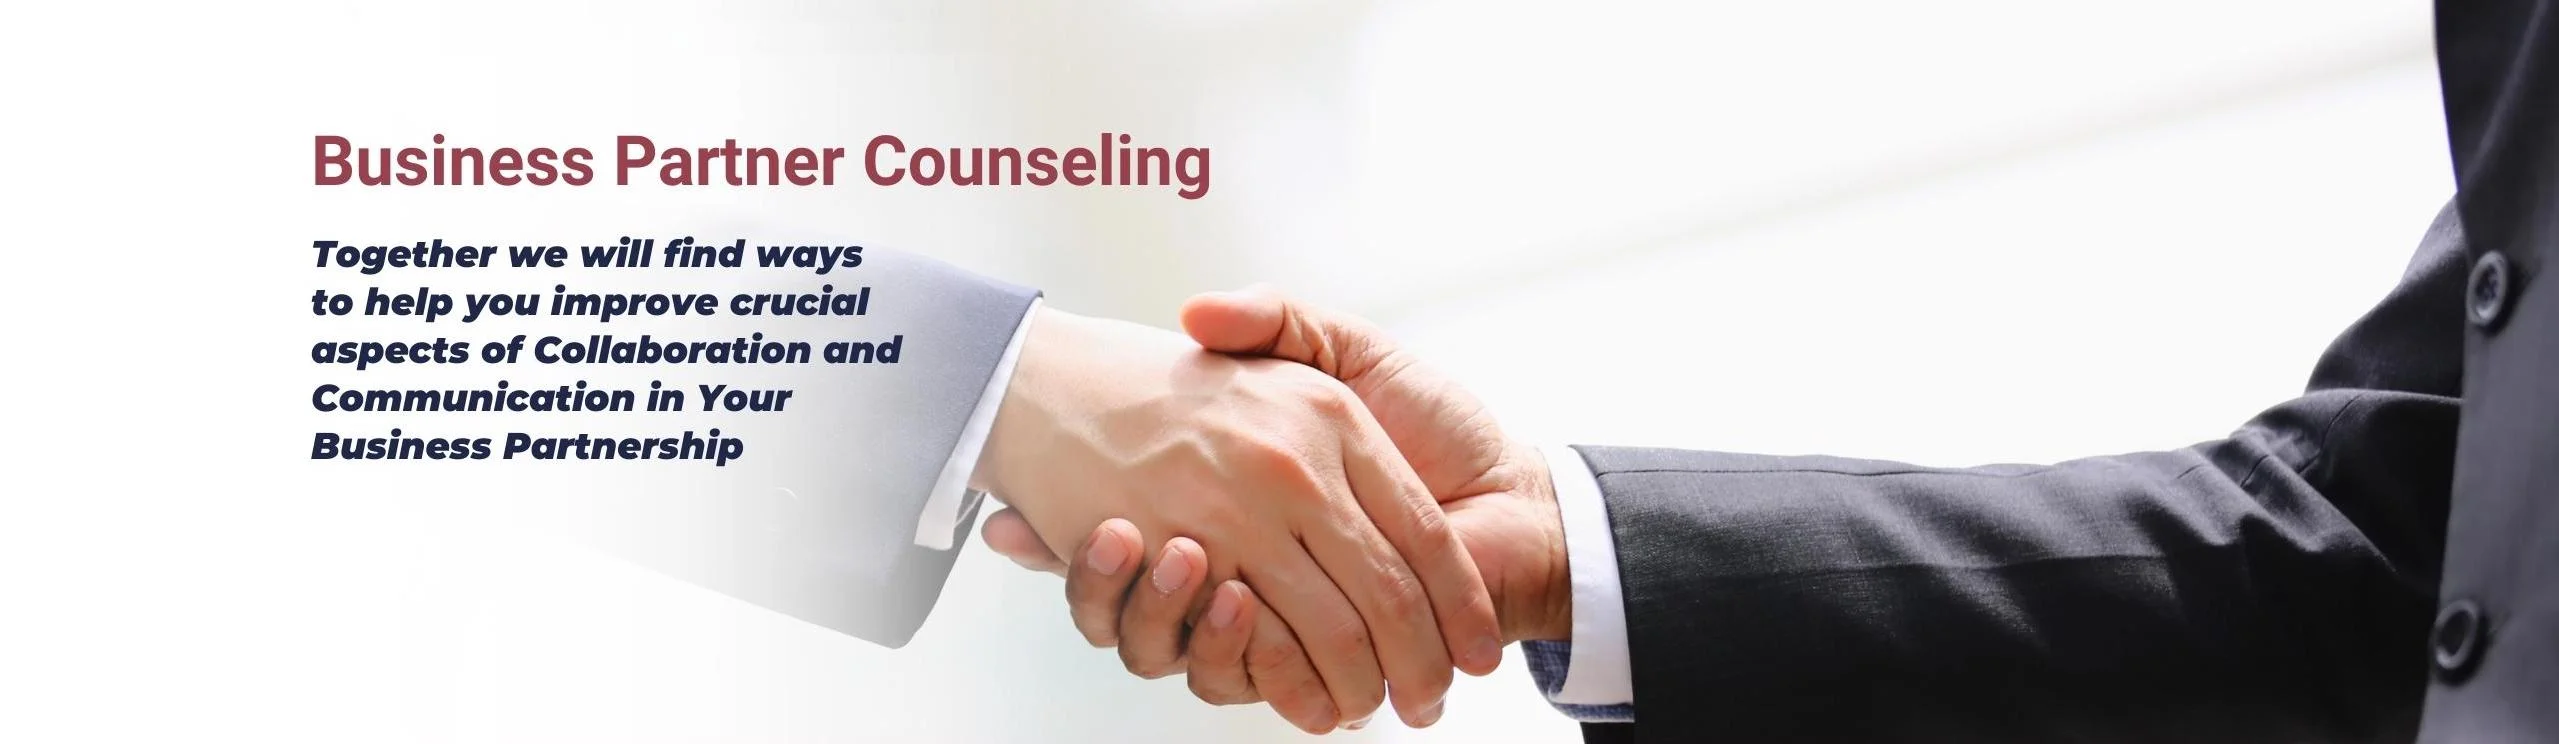 Business Partner Counseling for Partners - Page 1a